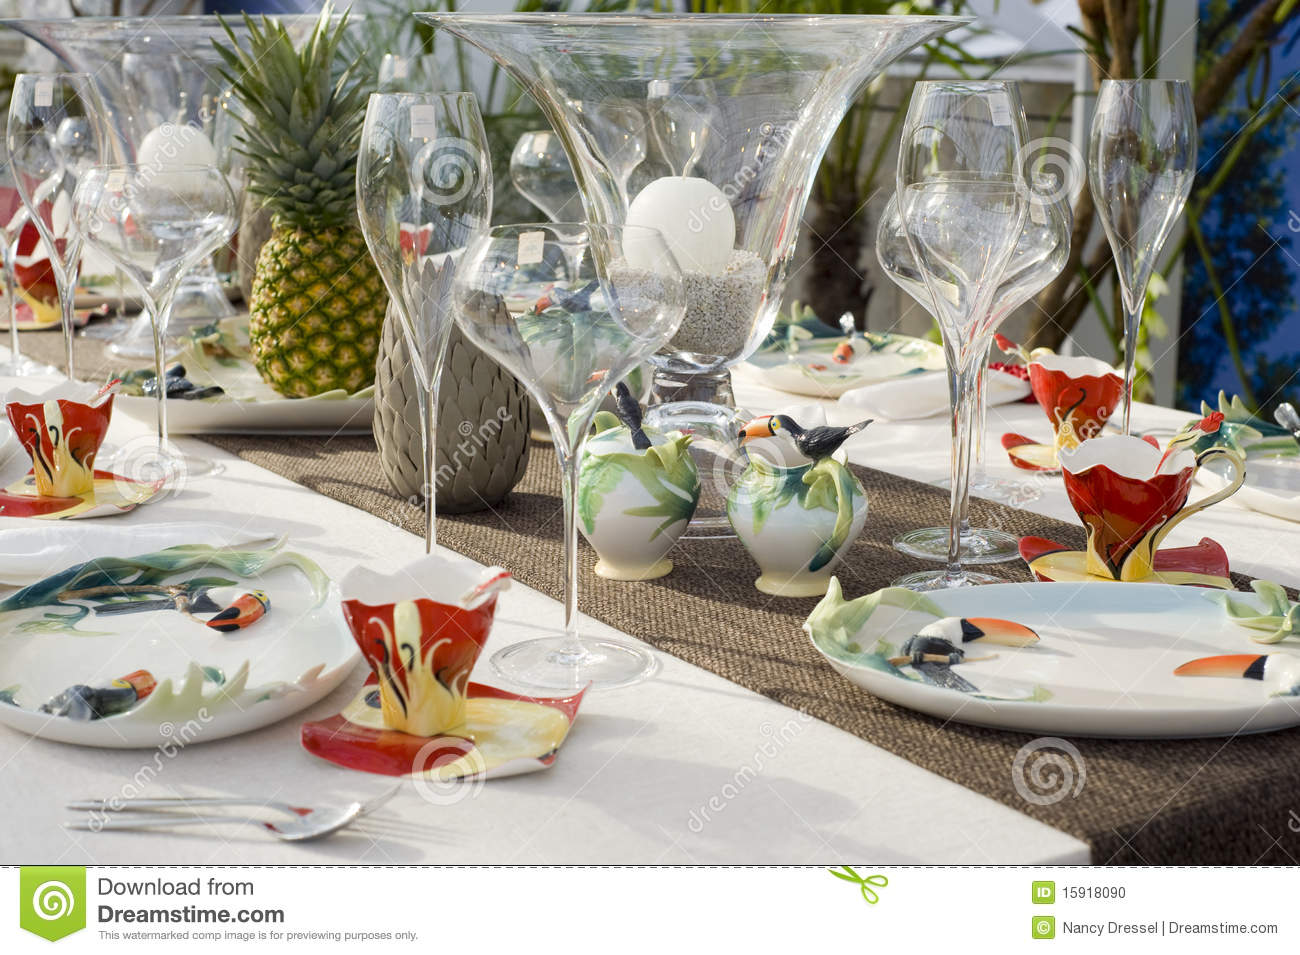 dining table setting photo - 2